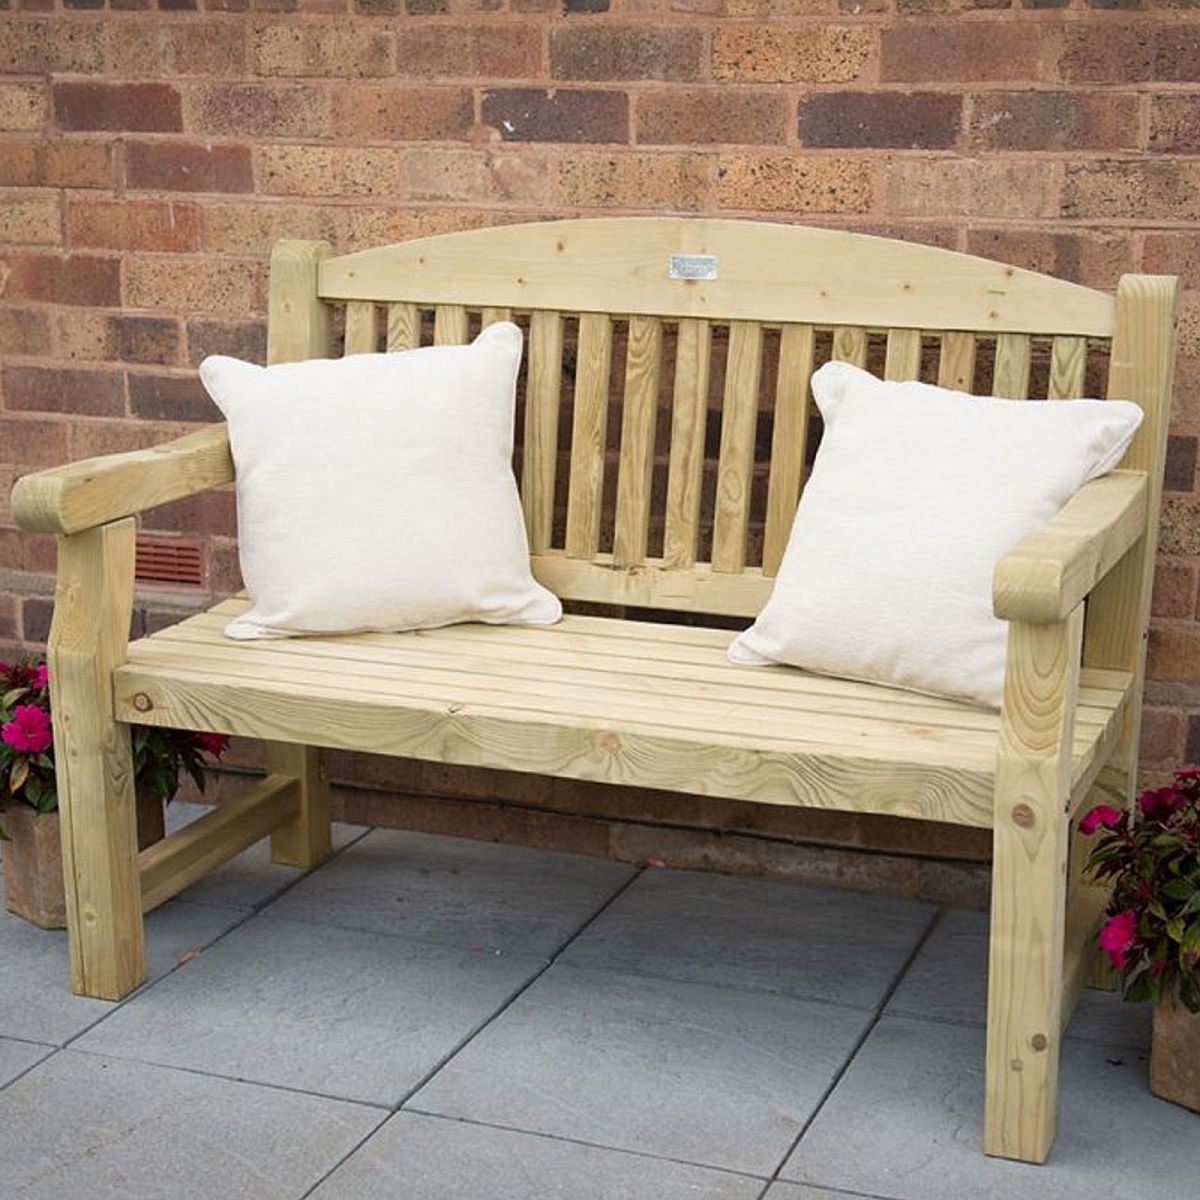 Outdoor Wooden Harvington Bench by Forest Garden